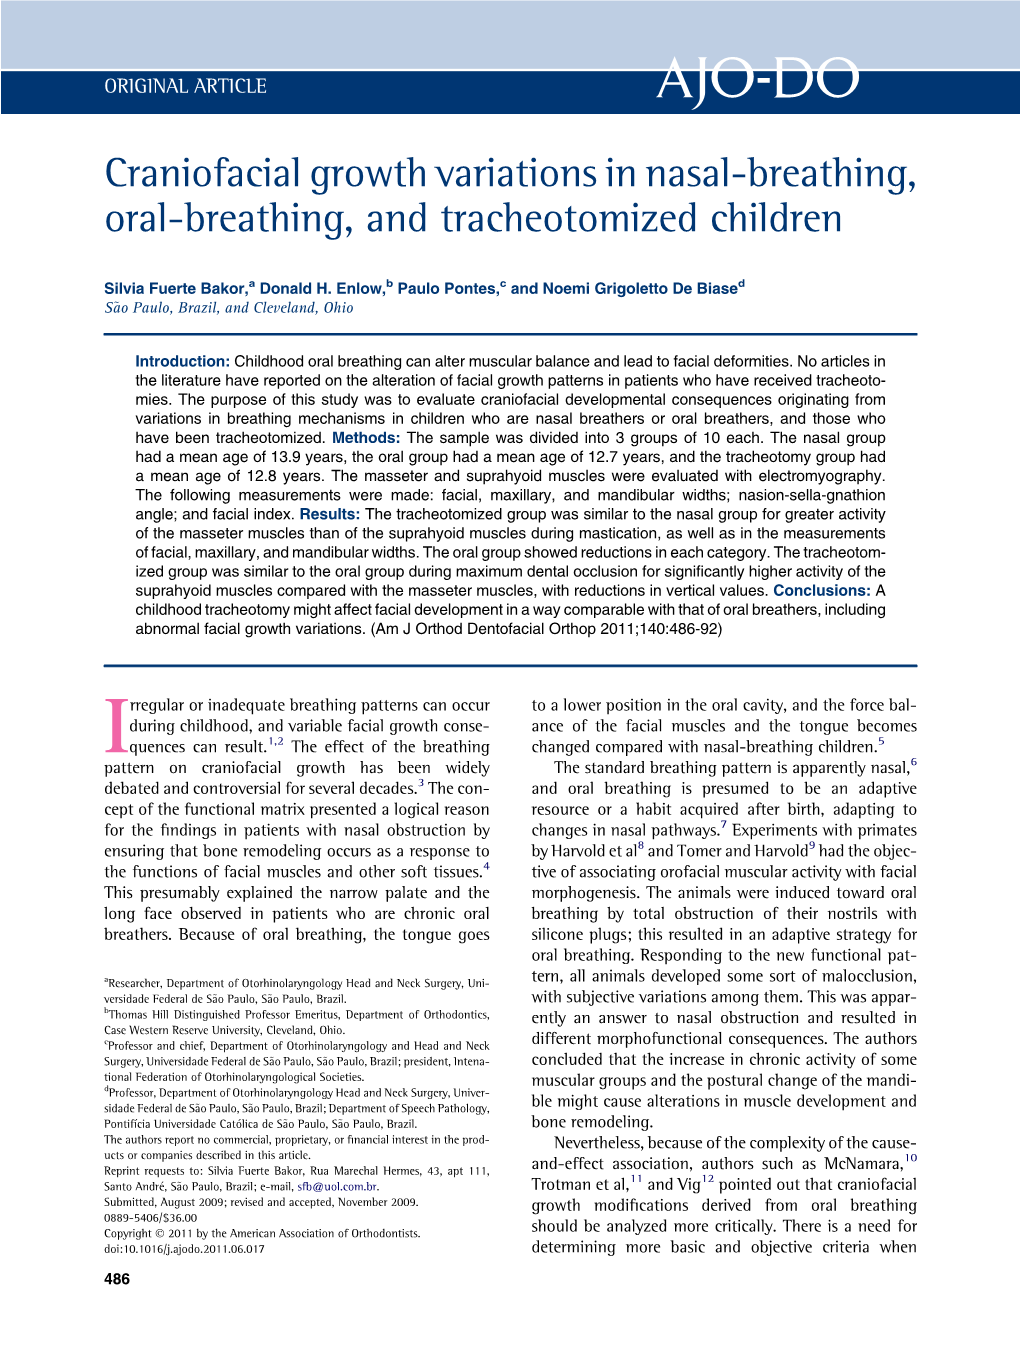 Craniofacial Growth Variations in Nasal-Breathing, Oral-Breathing, and Tracheotomized Children